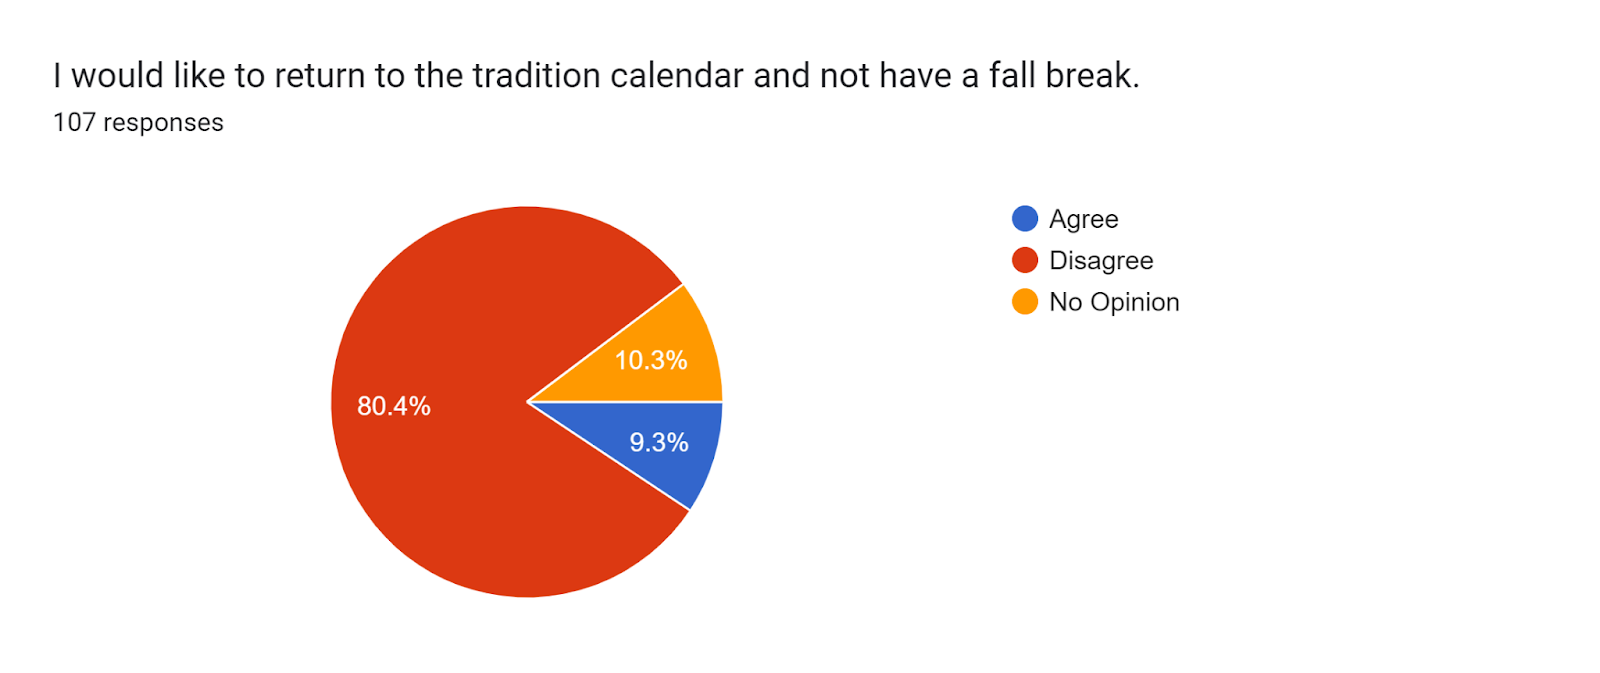 Forms response chart. Question title: I would like to return to the tradition calendar and not have a fall break.. Number of responses: 107 responses.